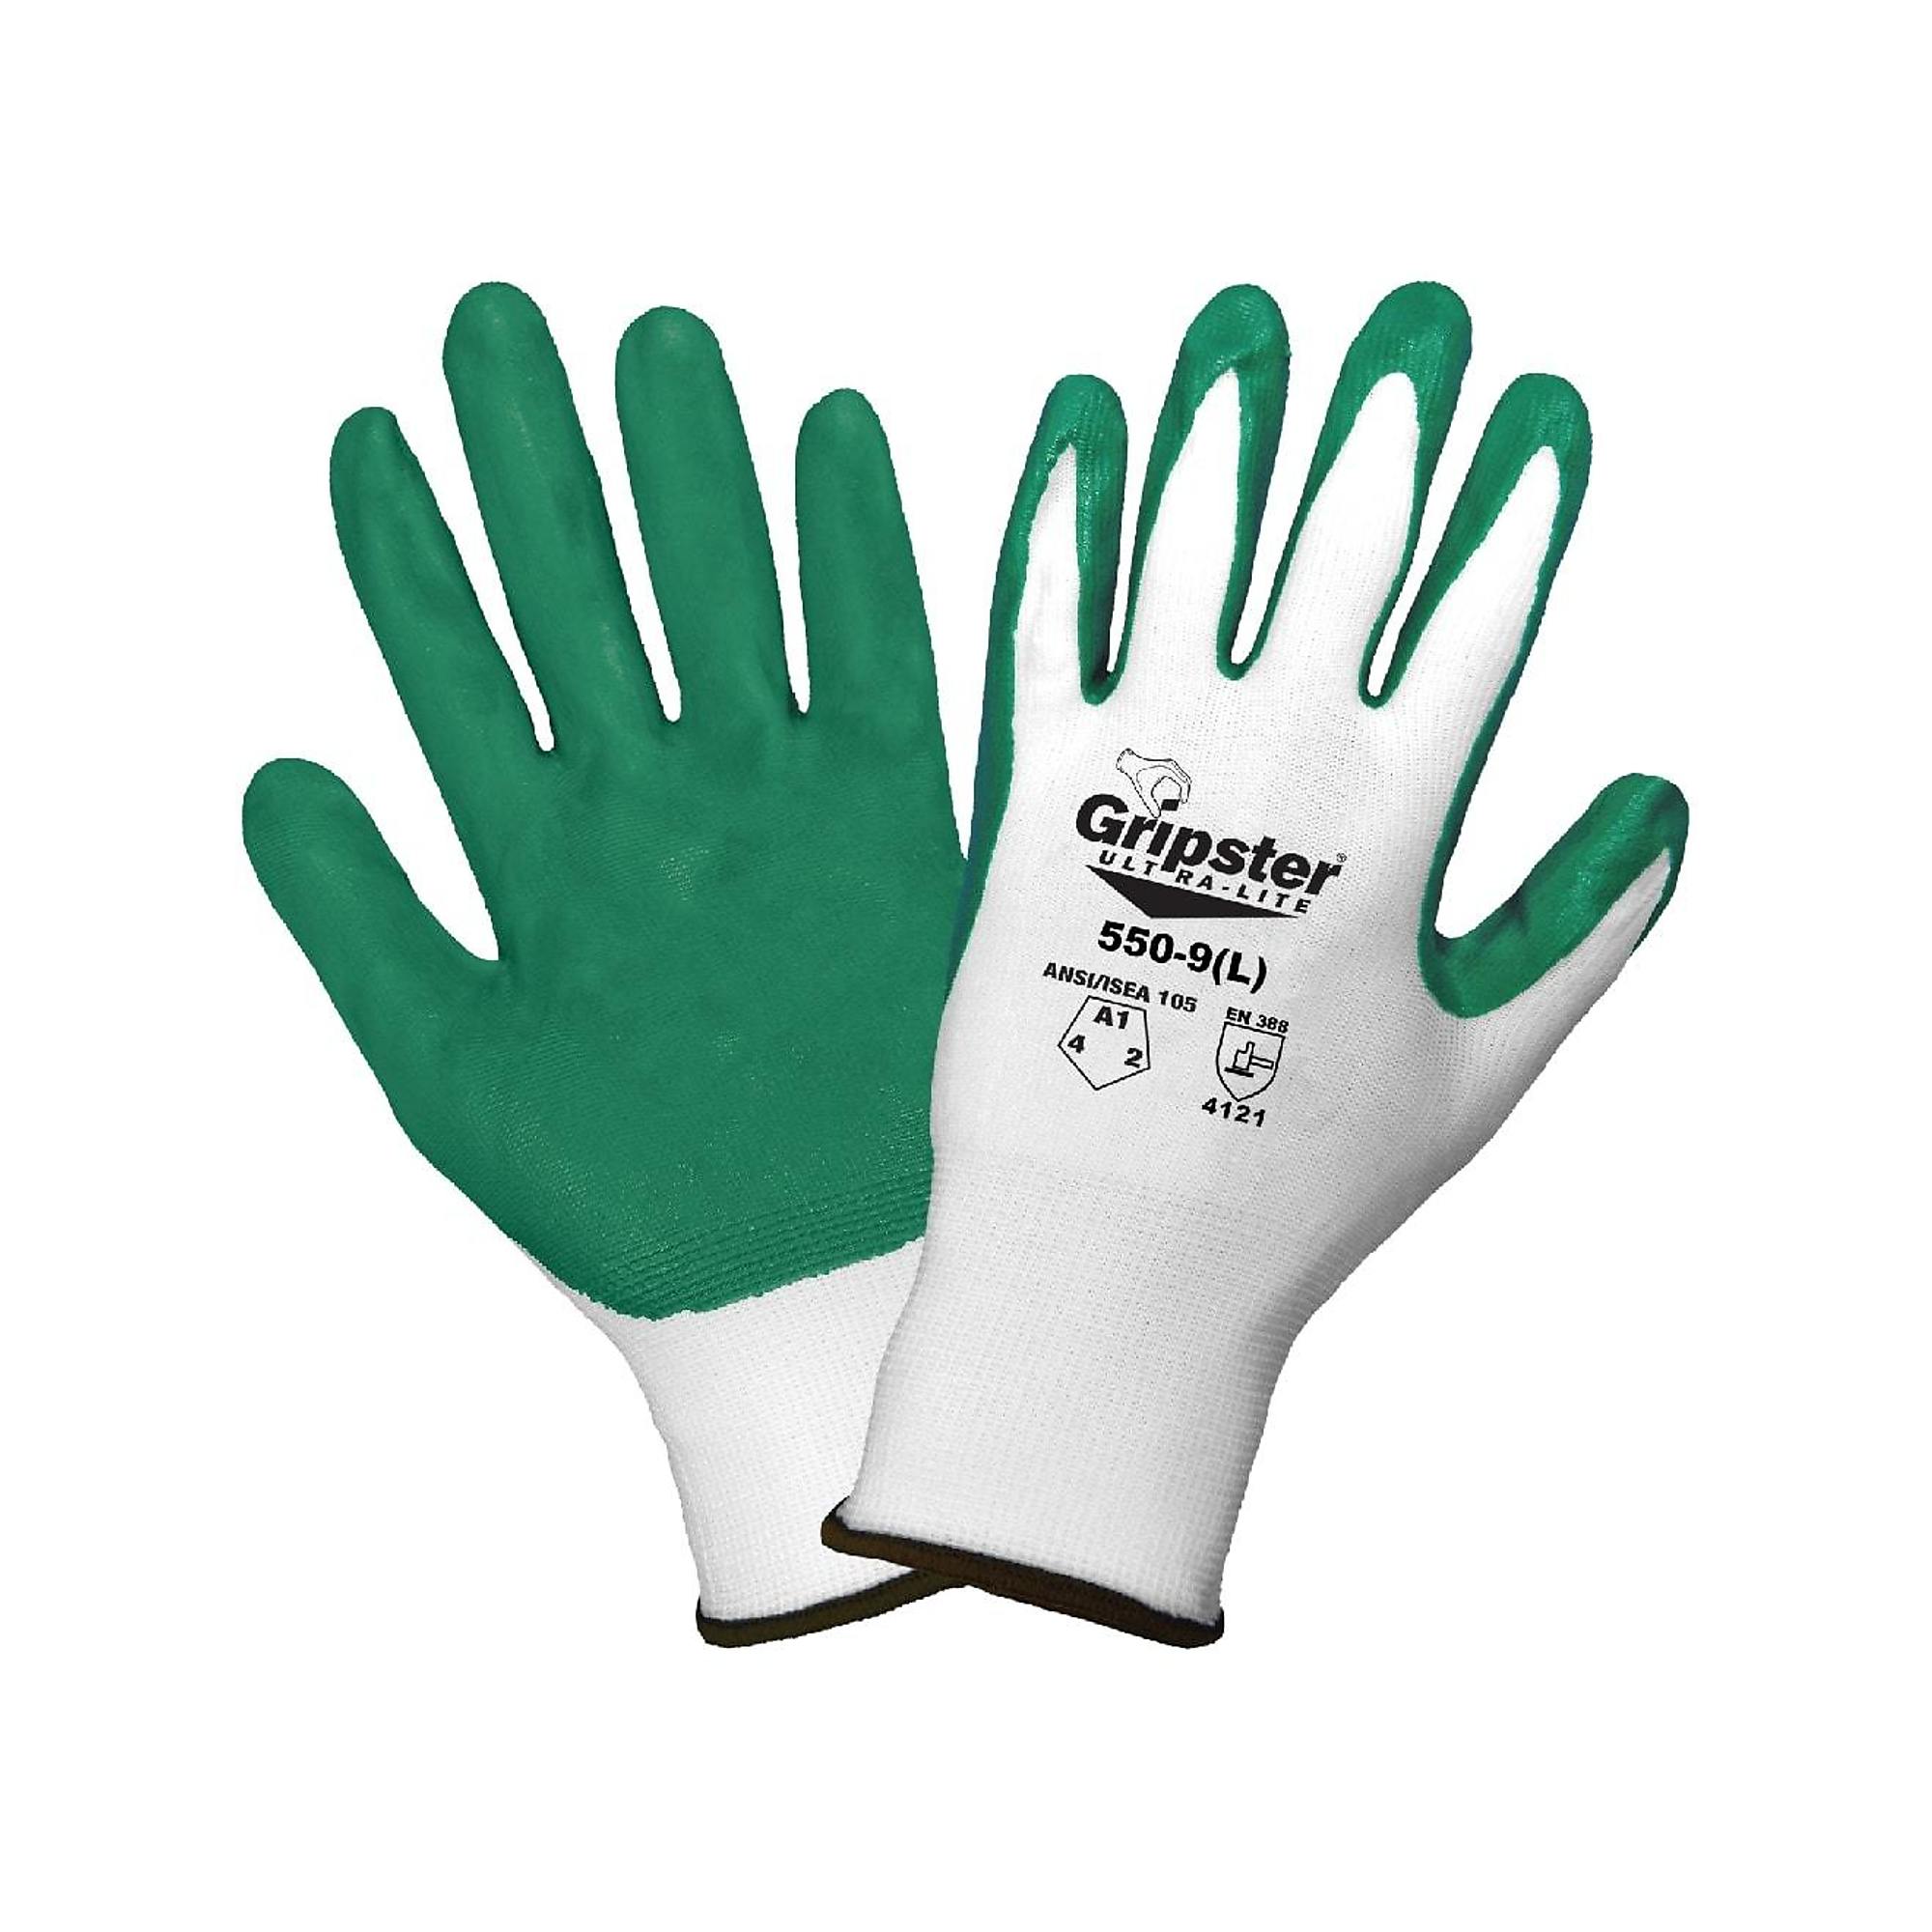 Global Glove Gripster , Solid Nitrile Coated Nylon Gloves - 12 Pairs, Size XS, Color White/Green, Included (qty.) 12 Model 550-6(XS)